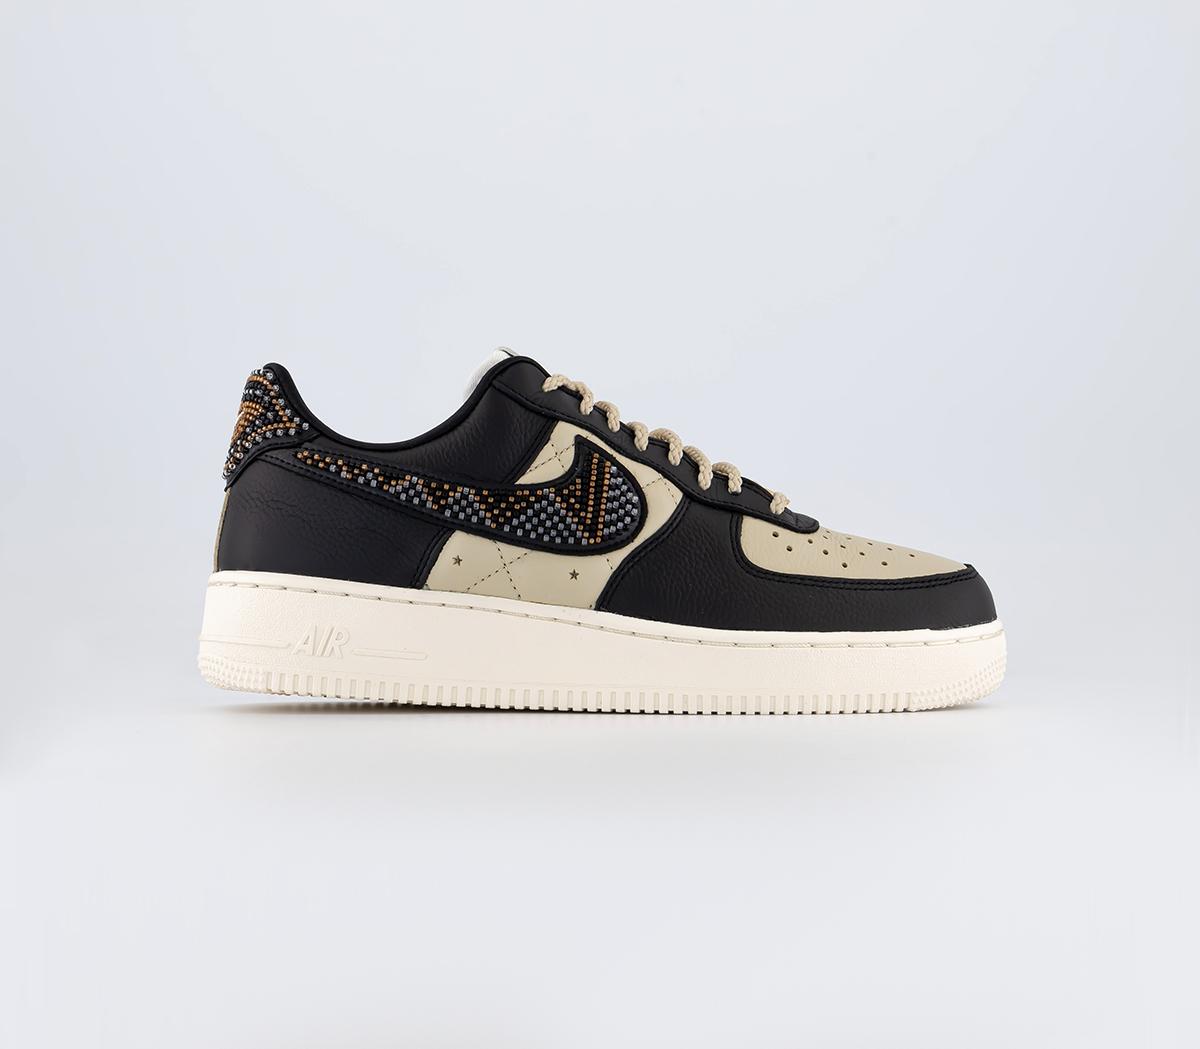 NikeAir Force 1 LV8 Trainers Pg Black Multi Color Sand Sail